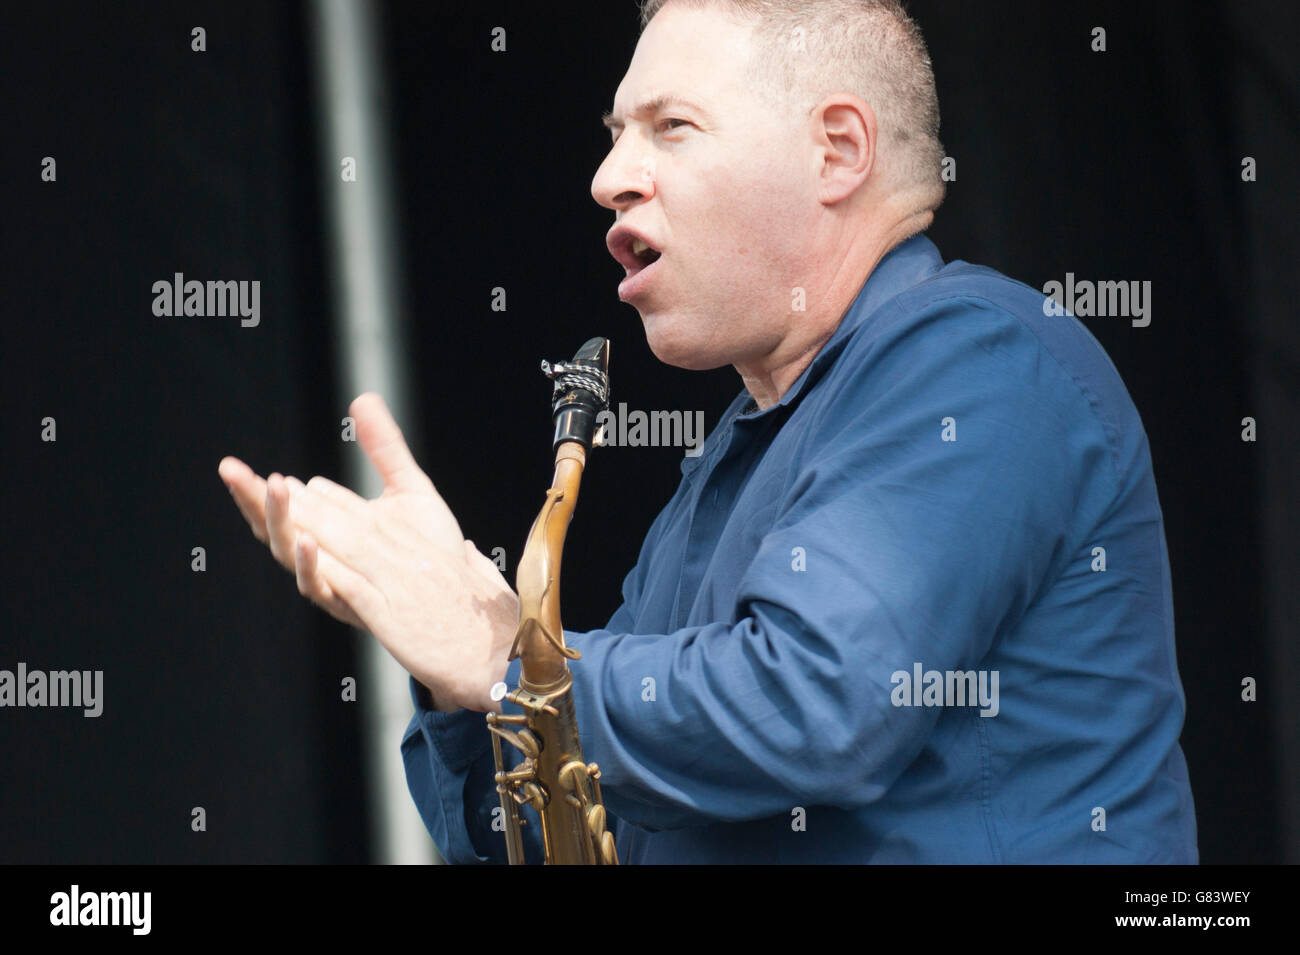 Mitch Frohman & The Bronx Horns, a Mambo Orchestra, performing at the 2015 American Folk Festival, Bangor, ME Stock Photo